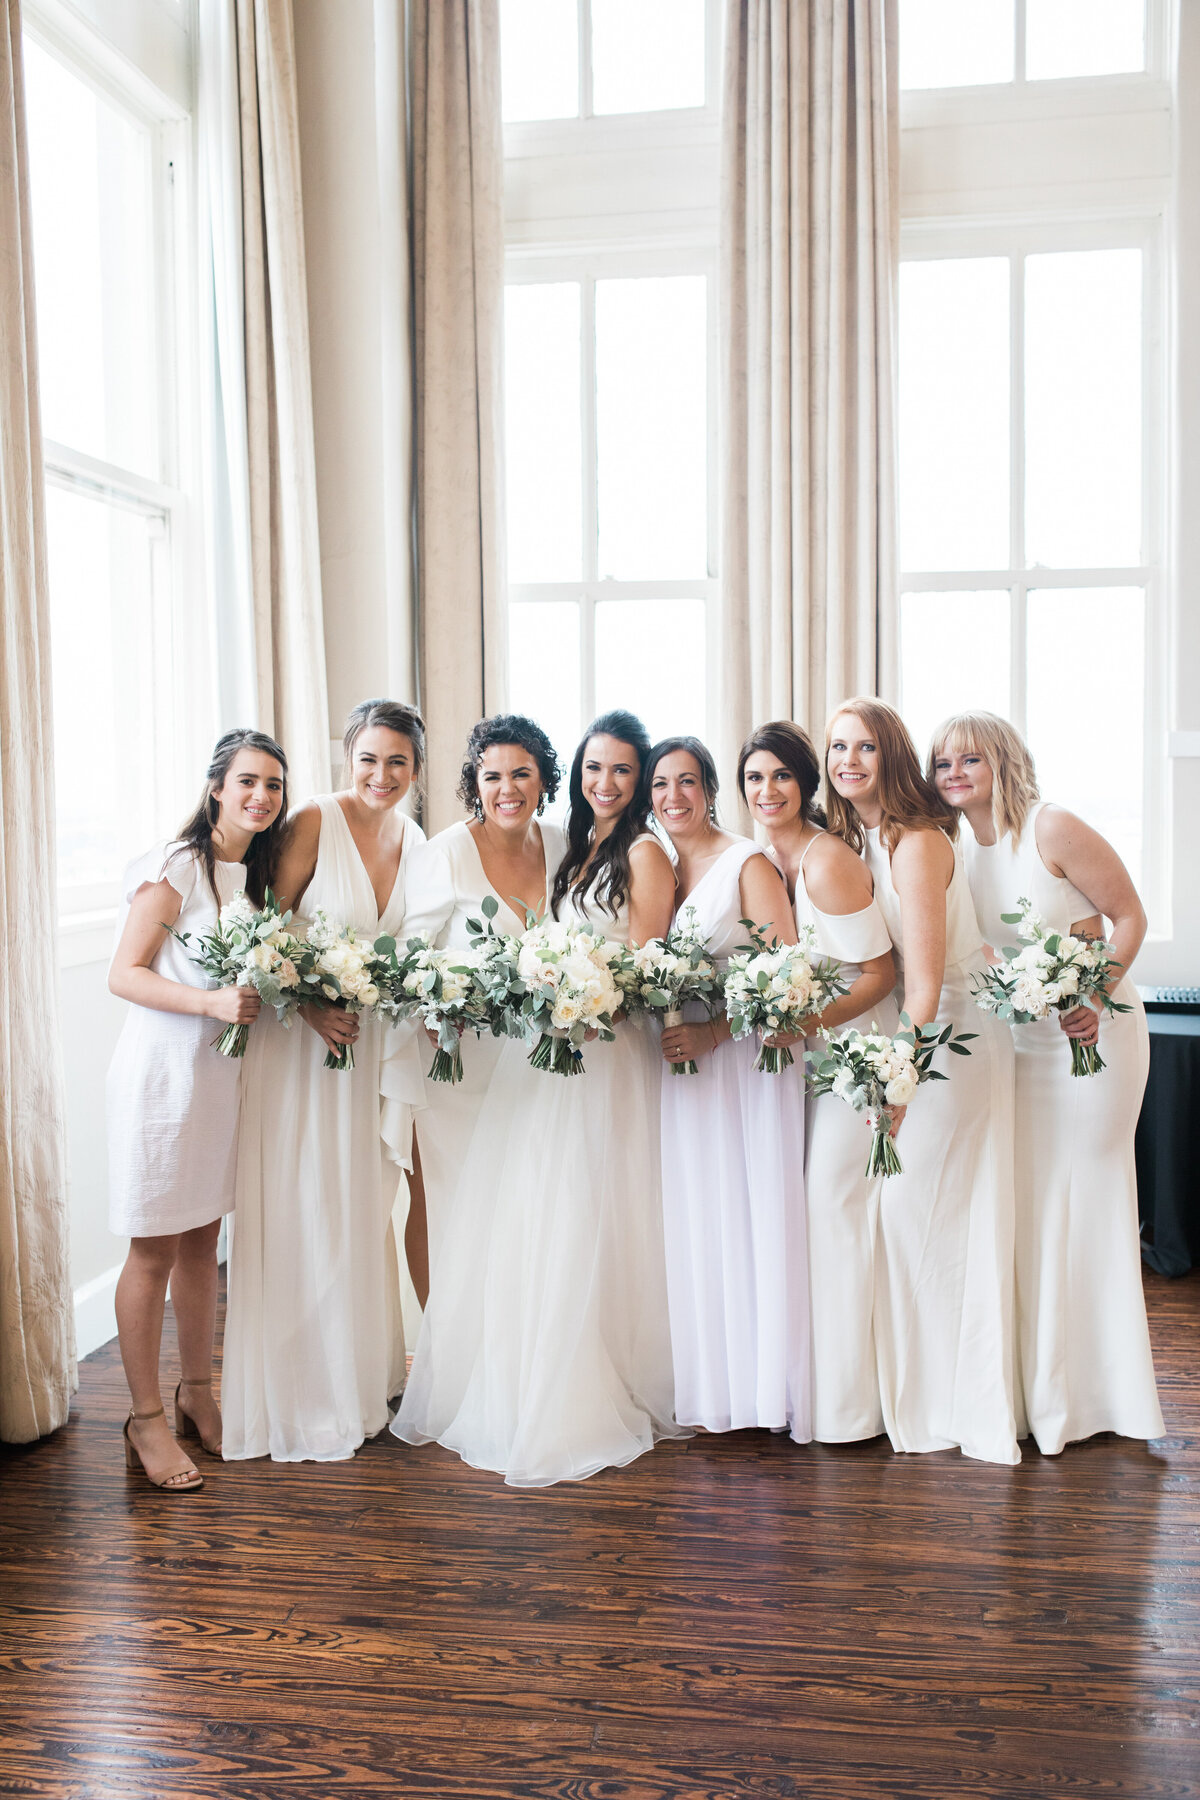 A portrait of a bride and her bridesmaids before her wedding ceremony at the Room on Main in Dallas, Texas.  Everyone, including the bride, is wearing white dresses and holding bouquets of white flowers. They are all smiling and standing very close to each other.